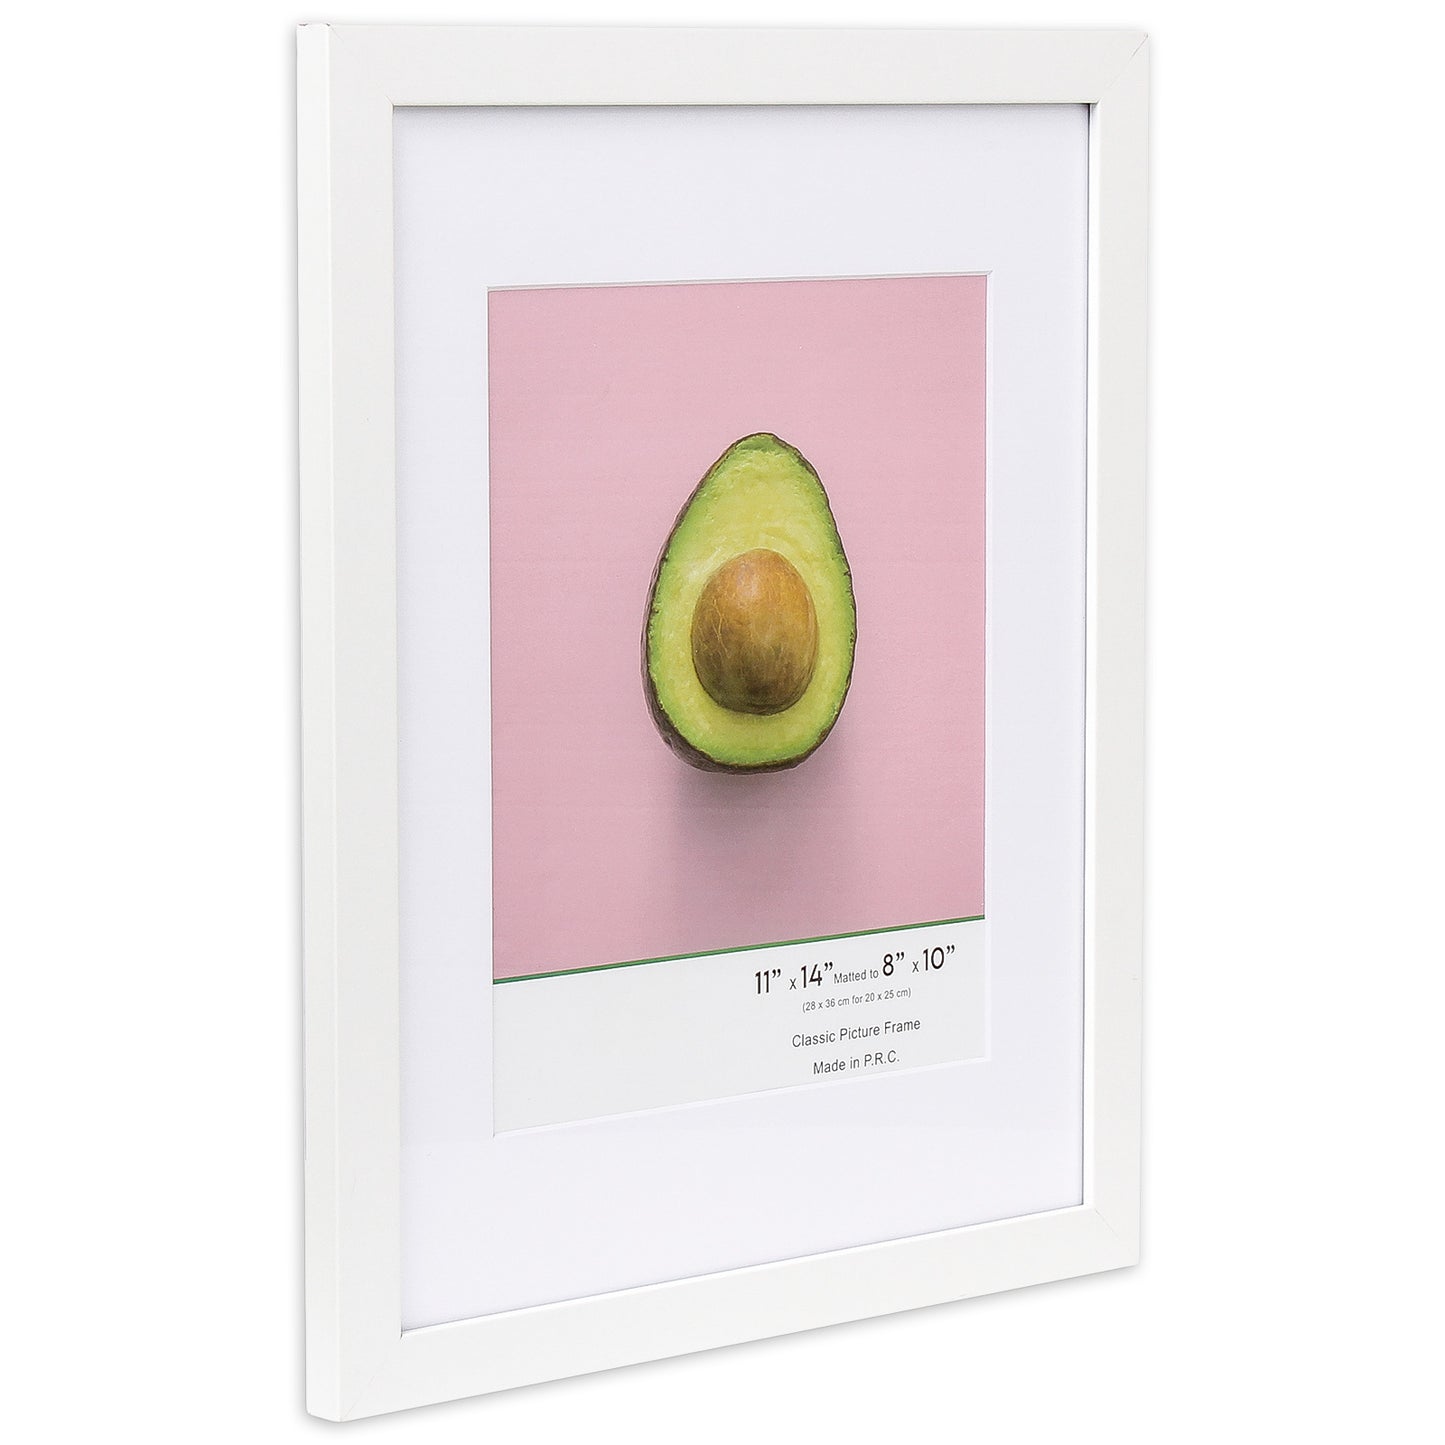 11" x 14” Classic White MDF Wood Picture Frame with Tempered Glass, 8" x 10" Matted